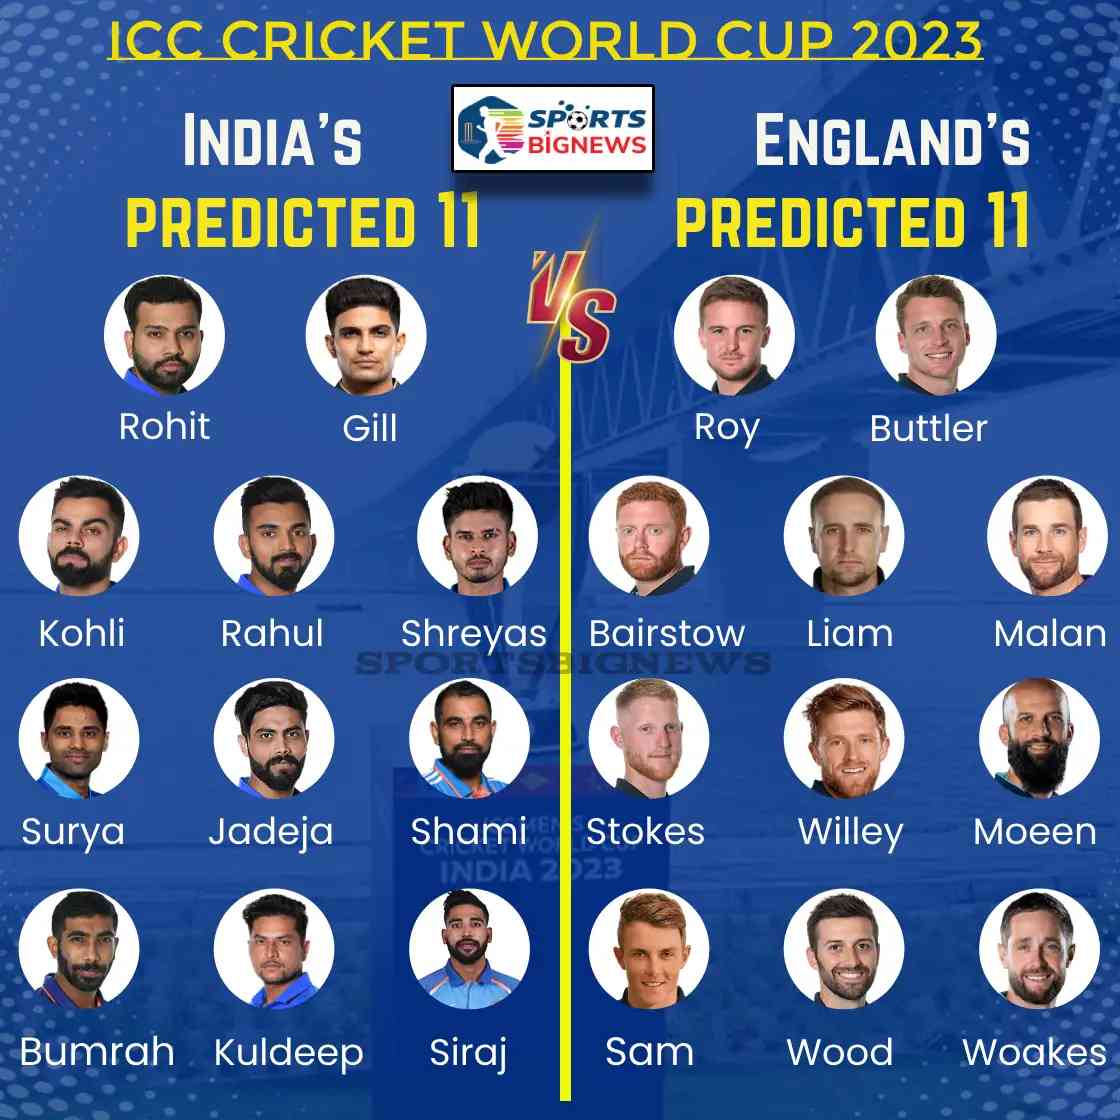 Cricket World Cup 2023: IND Vs ENG, Dream11, Free Live Stream